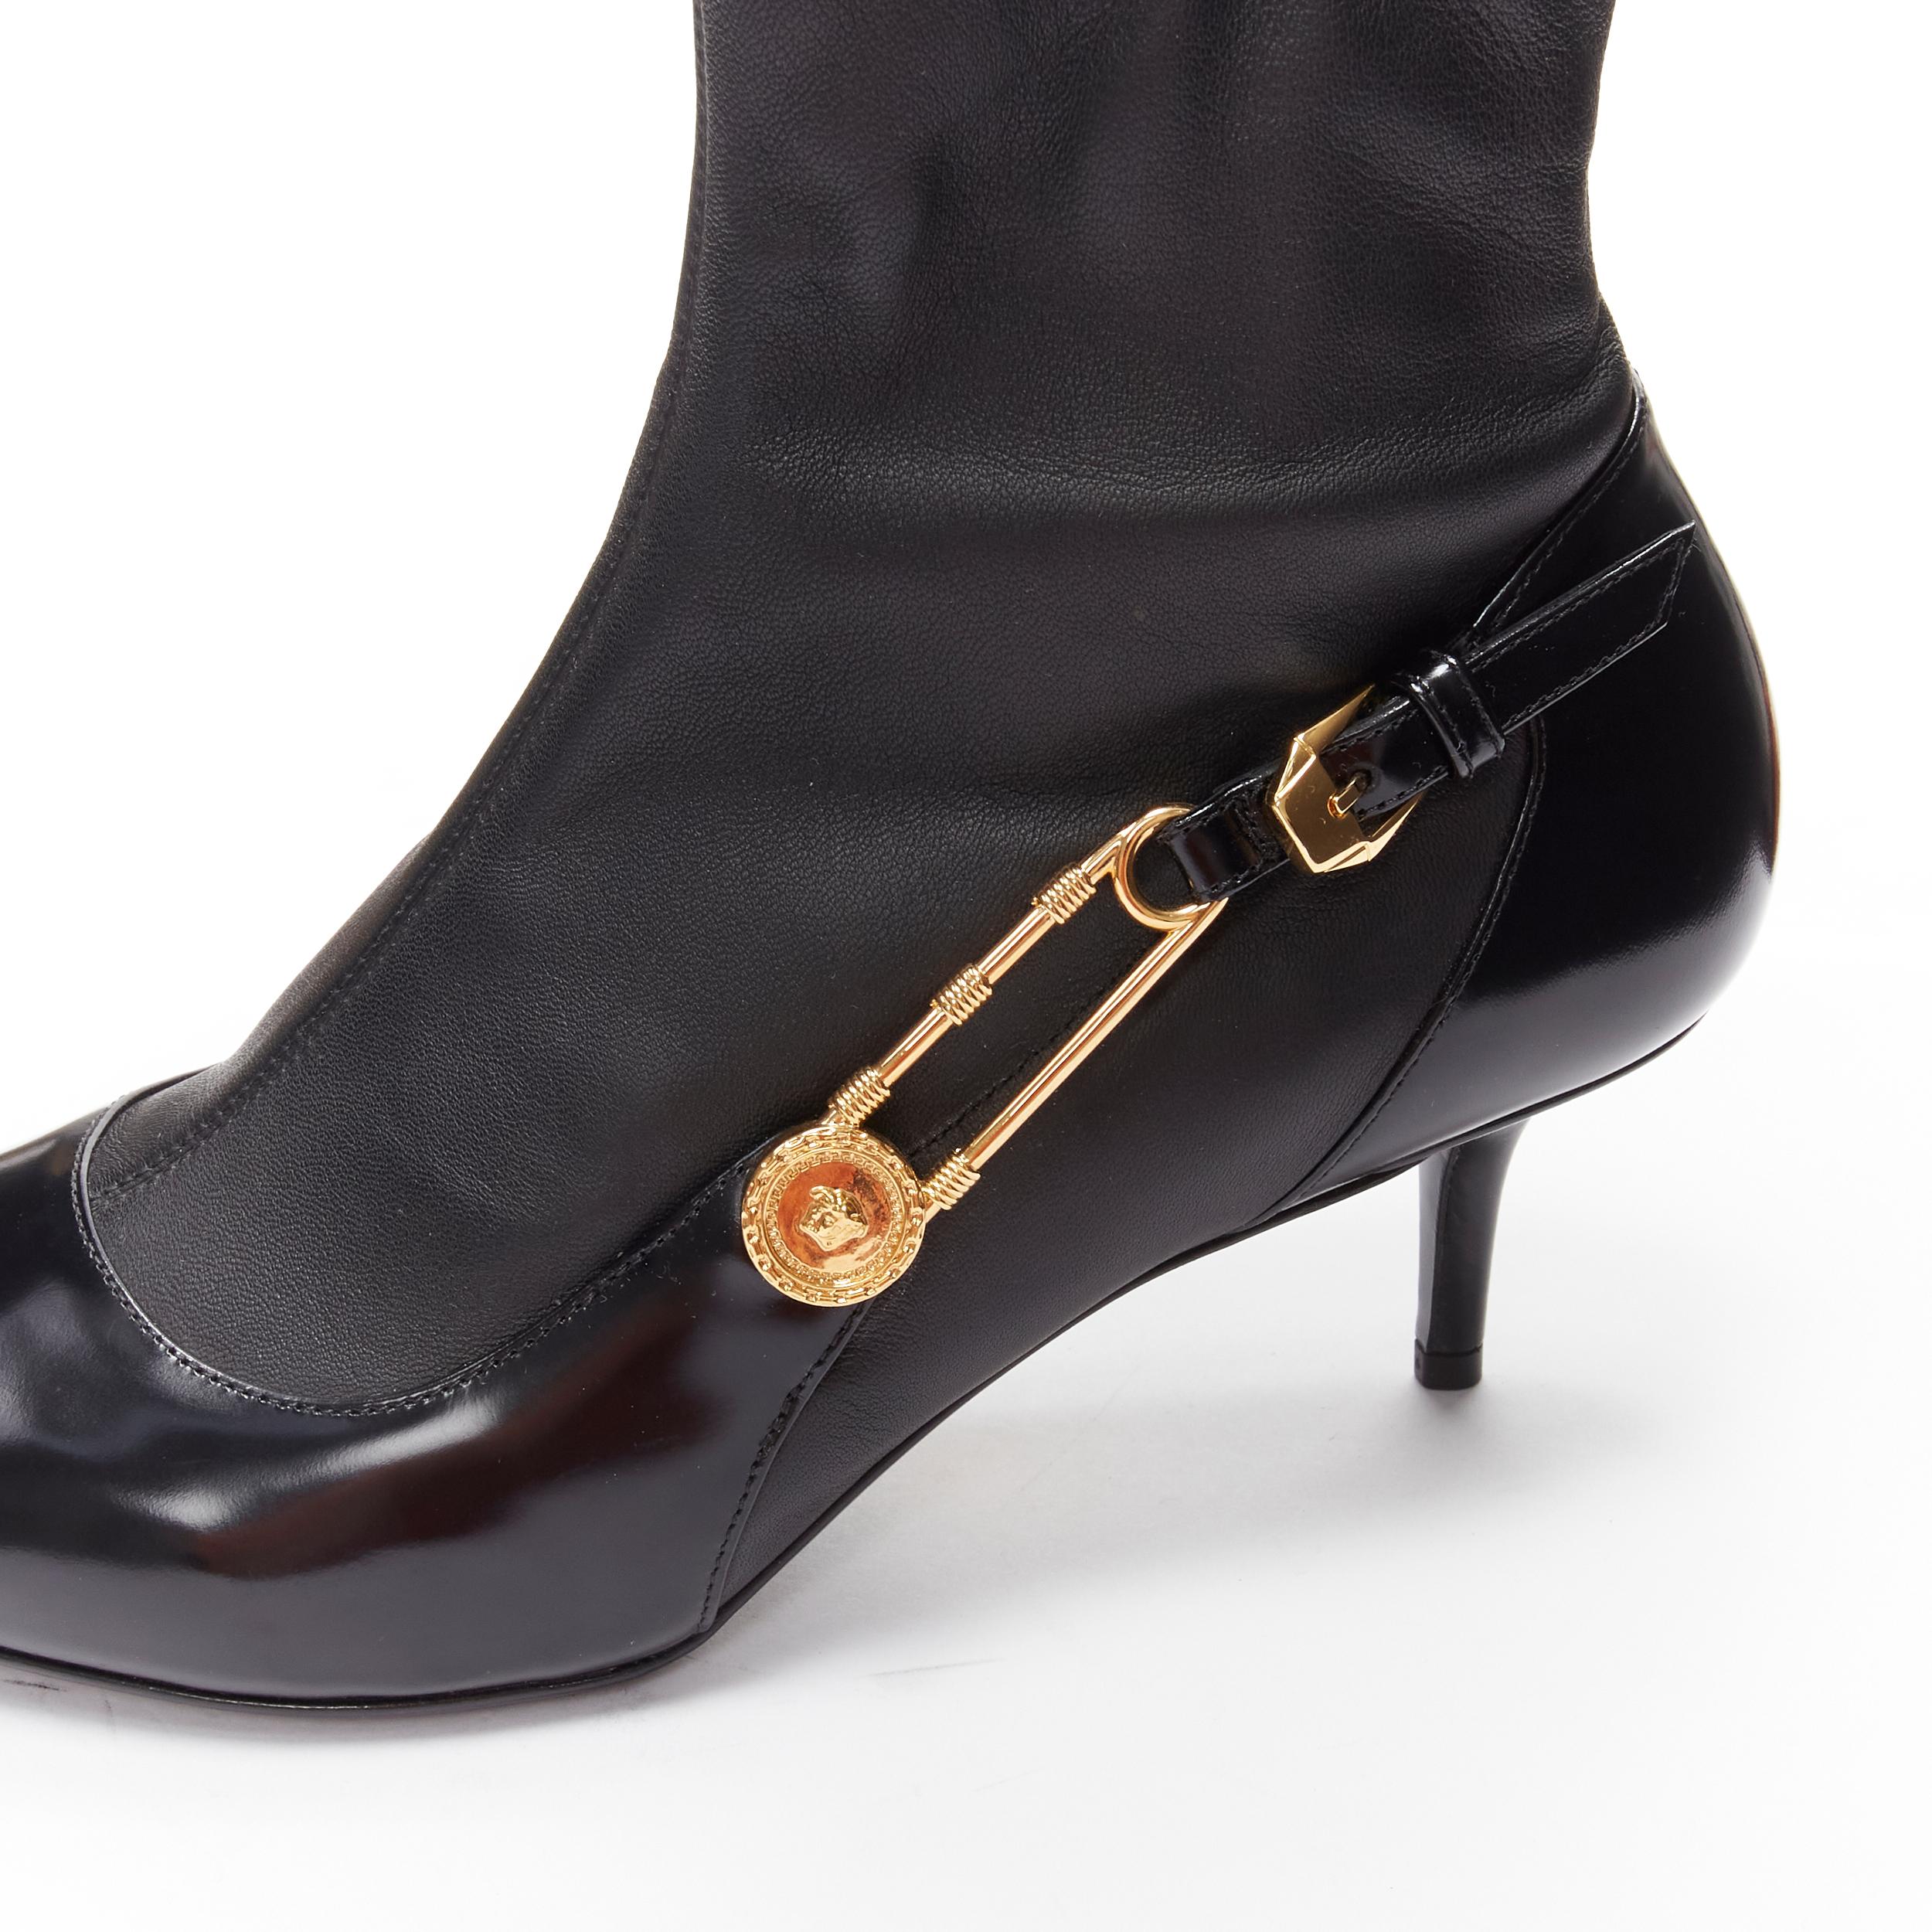 new VERSACE gold Medusa Punk Safety Pin black leather kitten heel bootie EU39
Reference: TGAS/C01798
Brand: Versace
Designer: Donatella Versace
Model: DST422H DNA28 D41OH
Material: Leather
Color: Black
Pattern: Solid
Extra Details: Soft leather sock